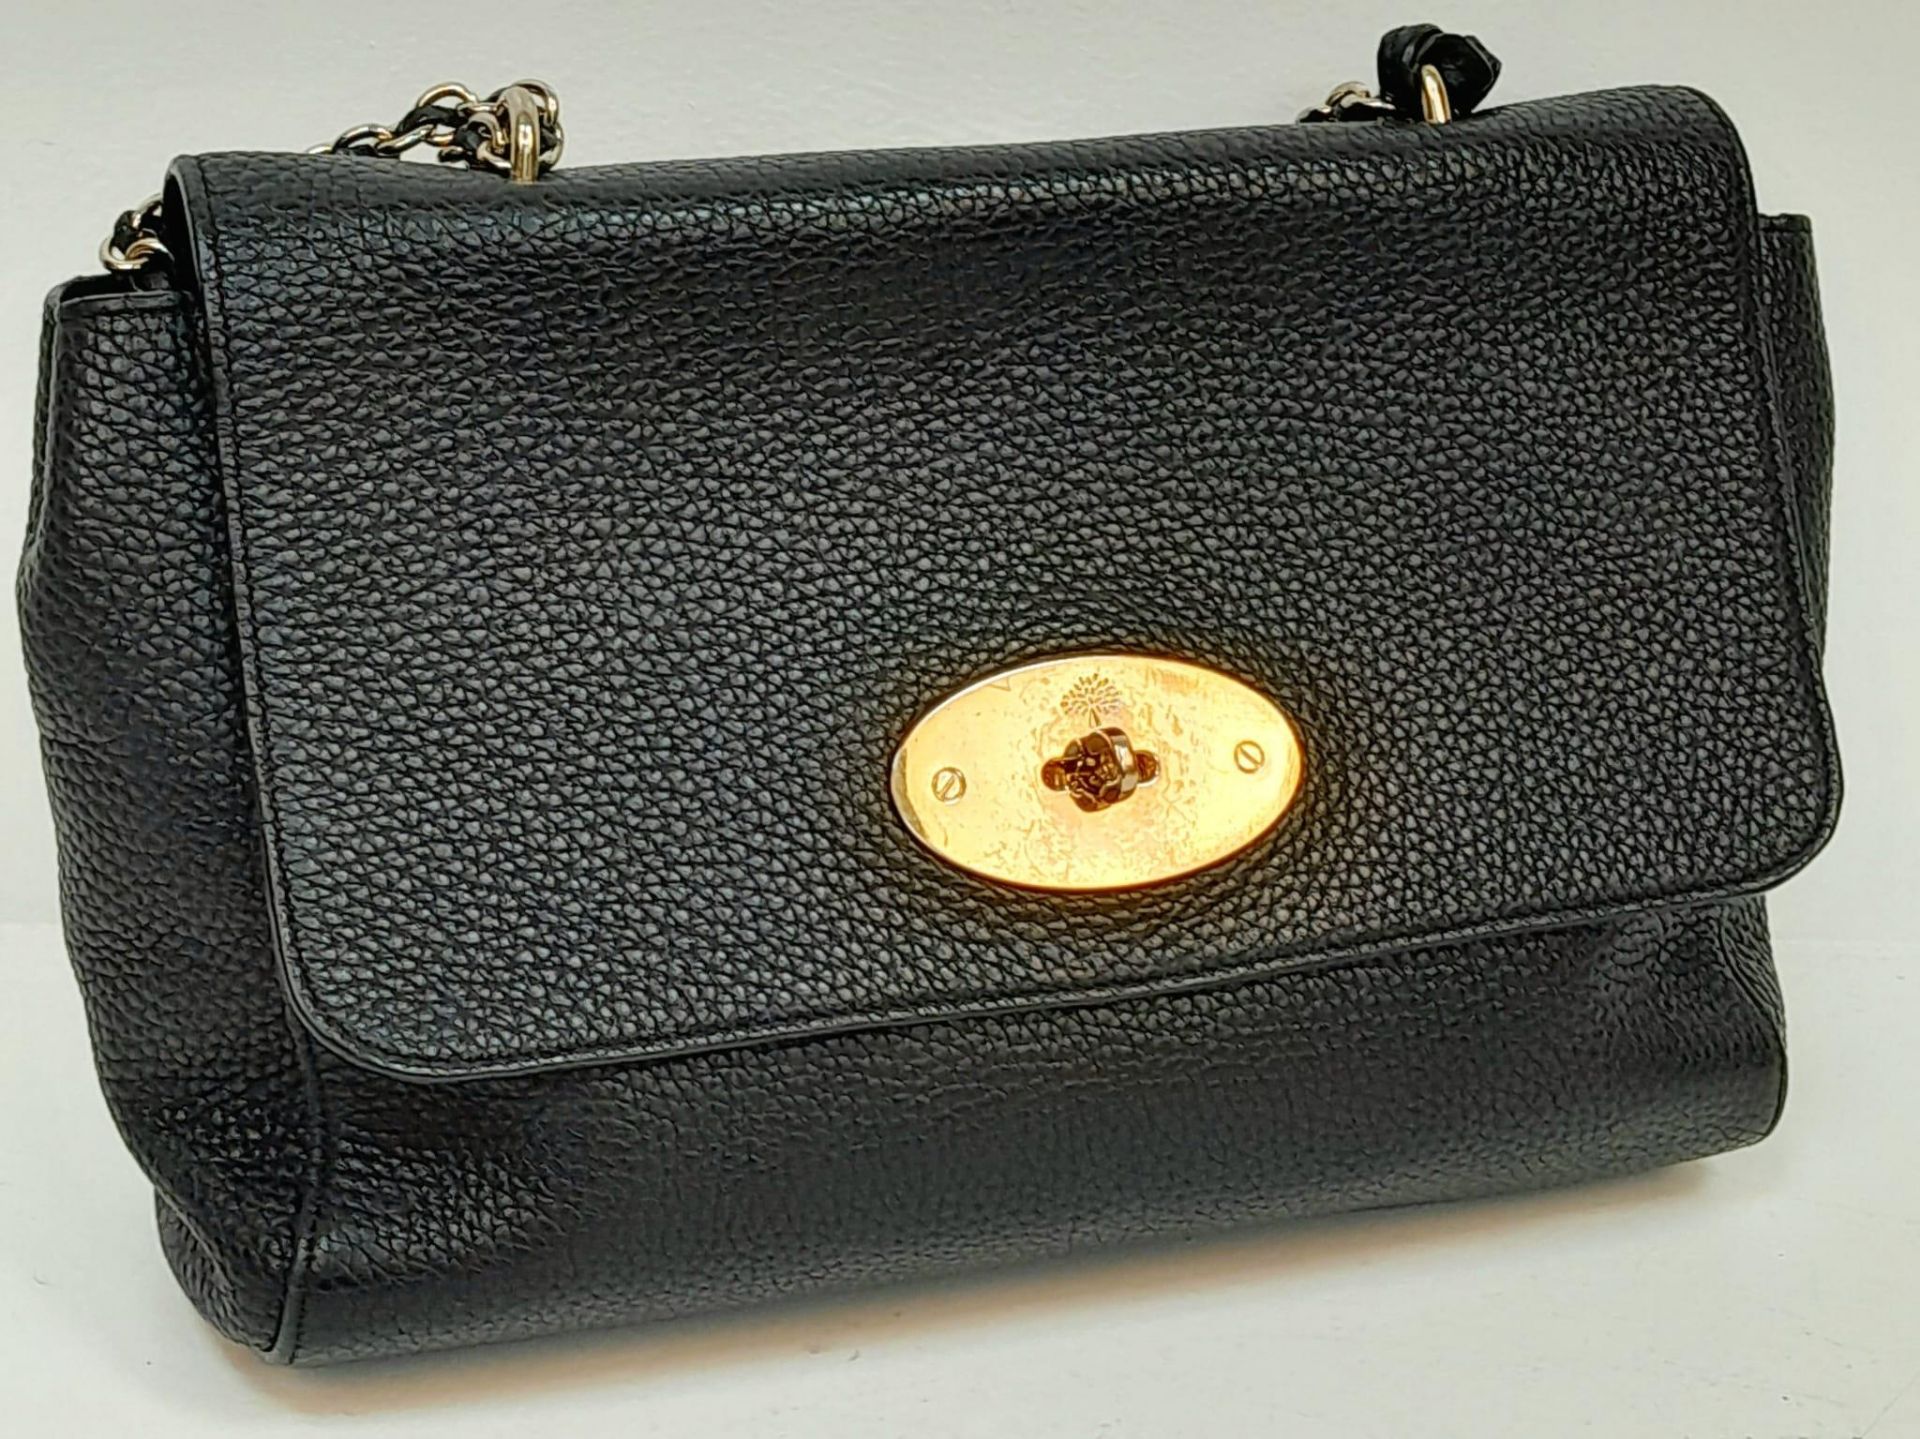 A Mulberry Black 'Lily' Bag. Leather exterior with gold-toned hardware, chain and leather strap, - Image 6 of 12